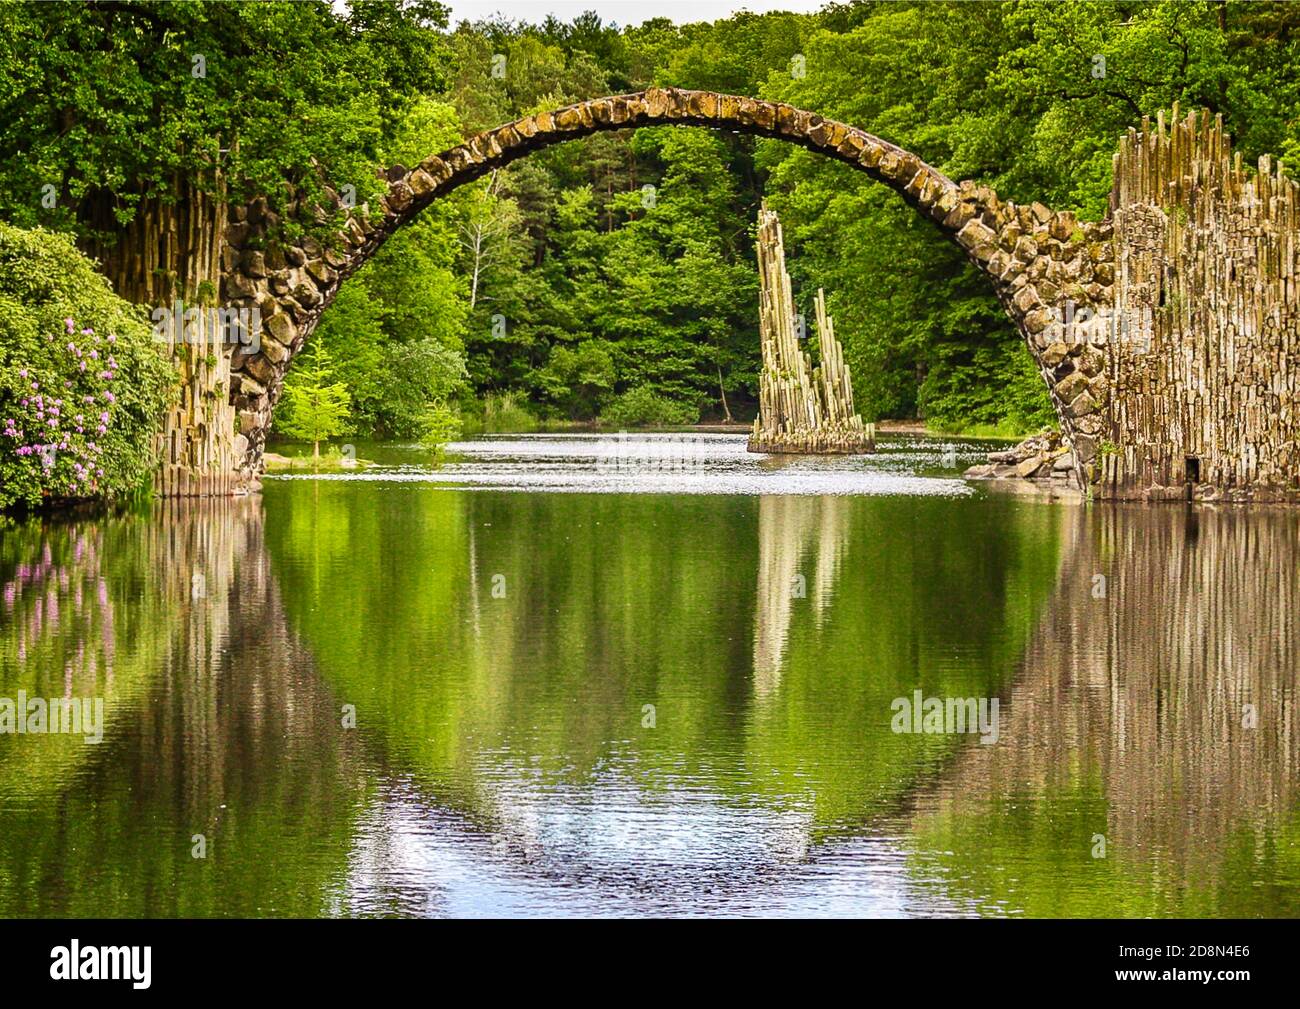 Beautiful old bridge photograph cropped from the original image by Kathleen Handrich and available on the public domain site Pixabay Stock Photo